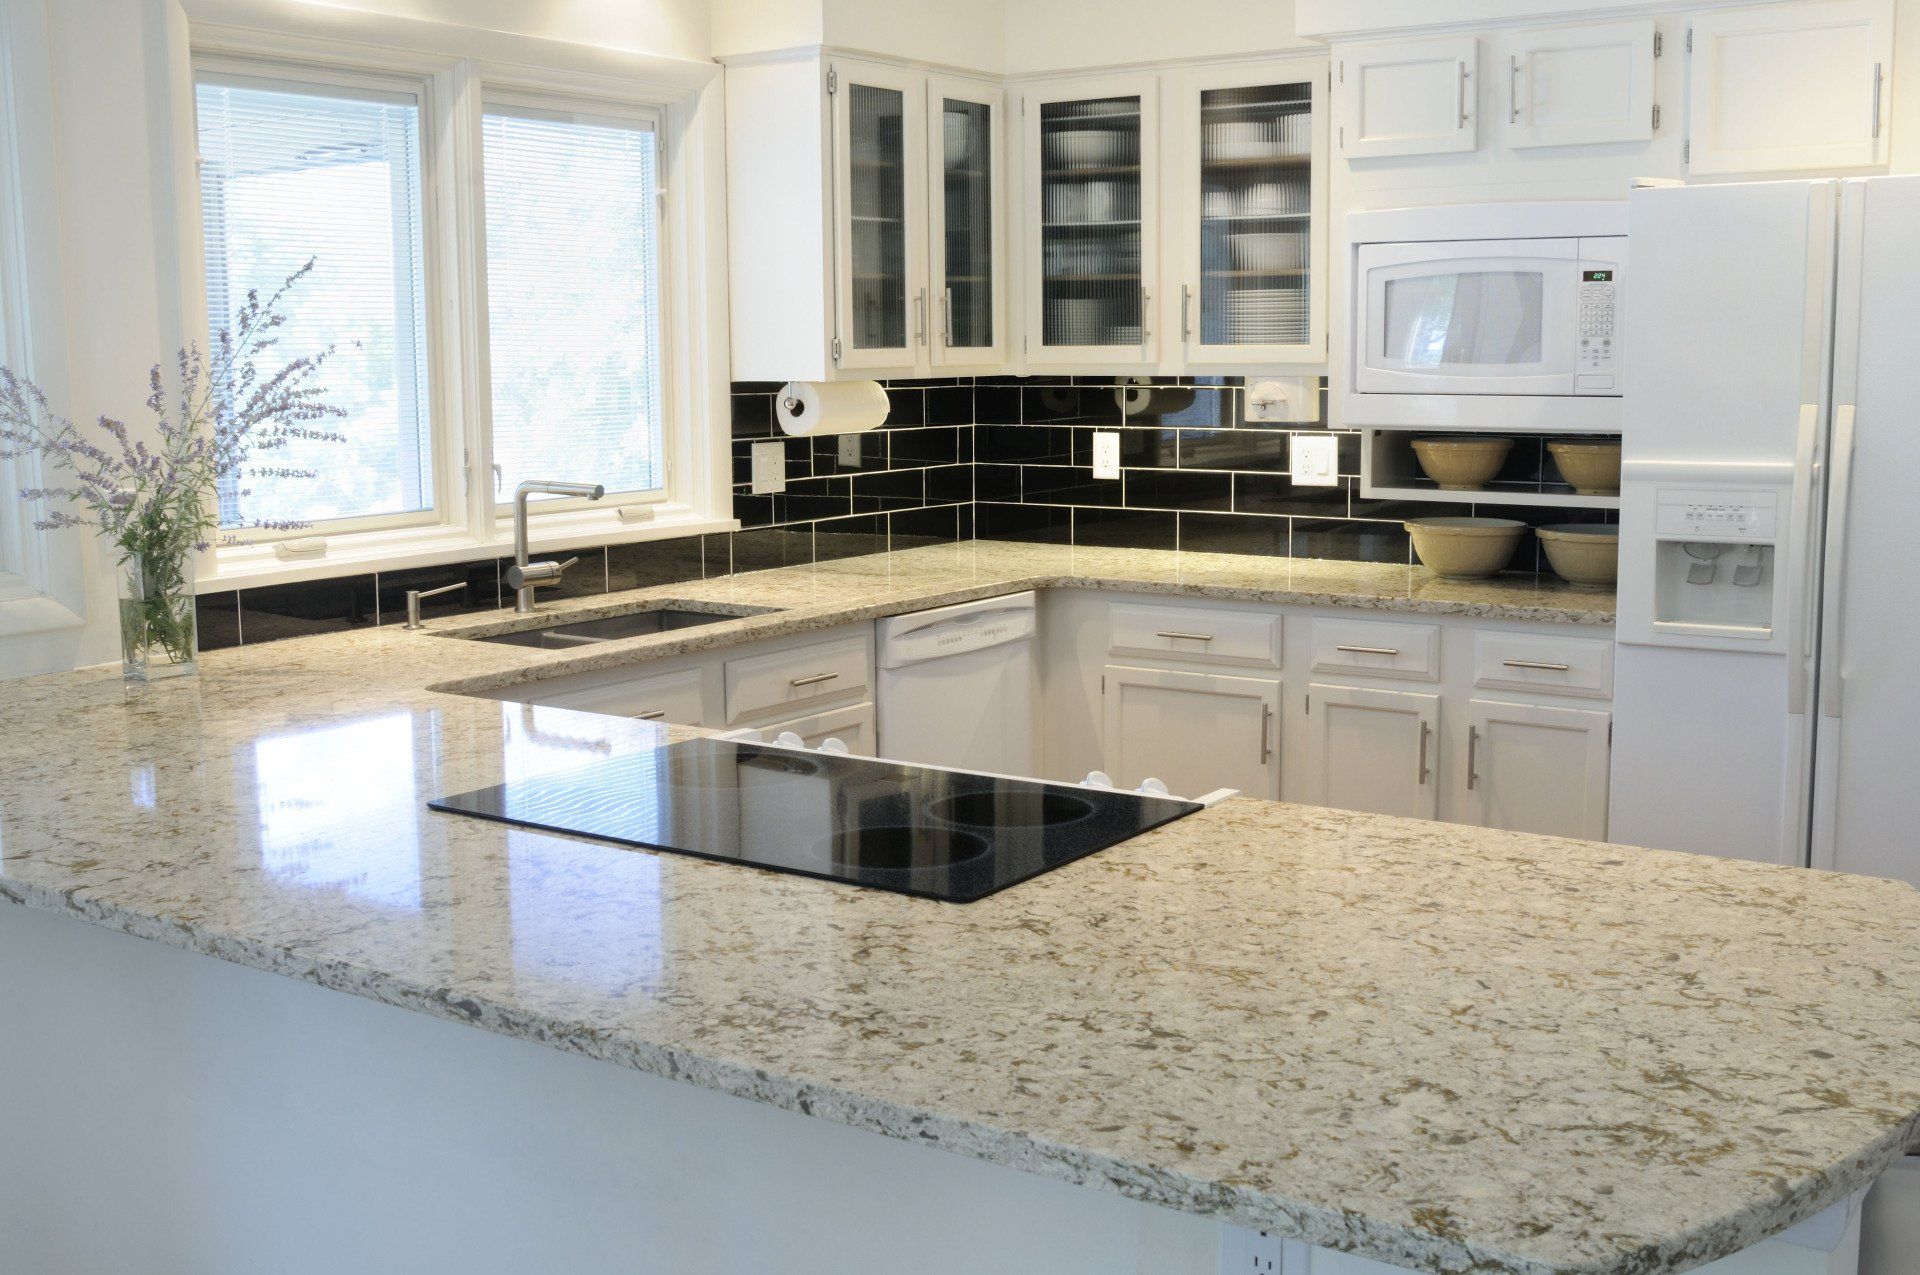 5 Quick Kitchen Tips for Preventing Countertop Damage